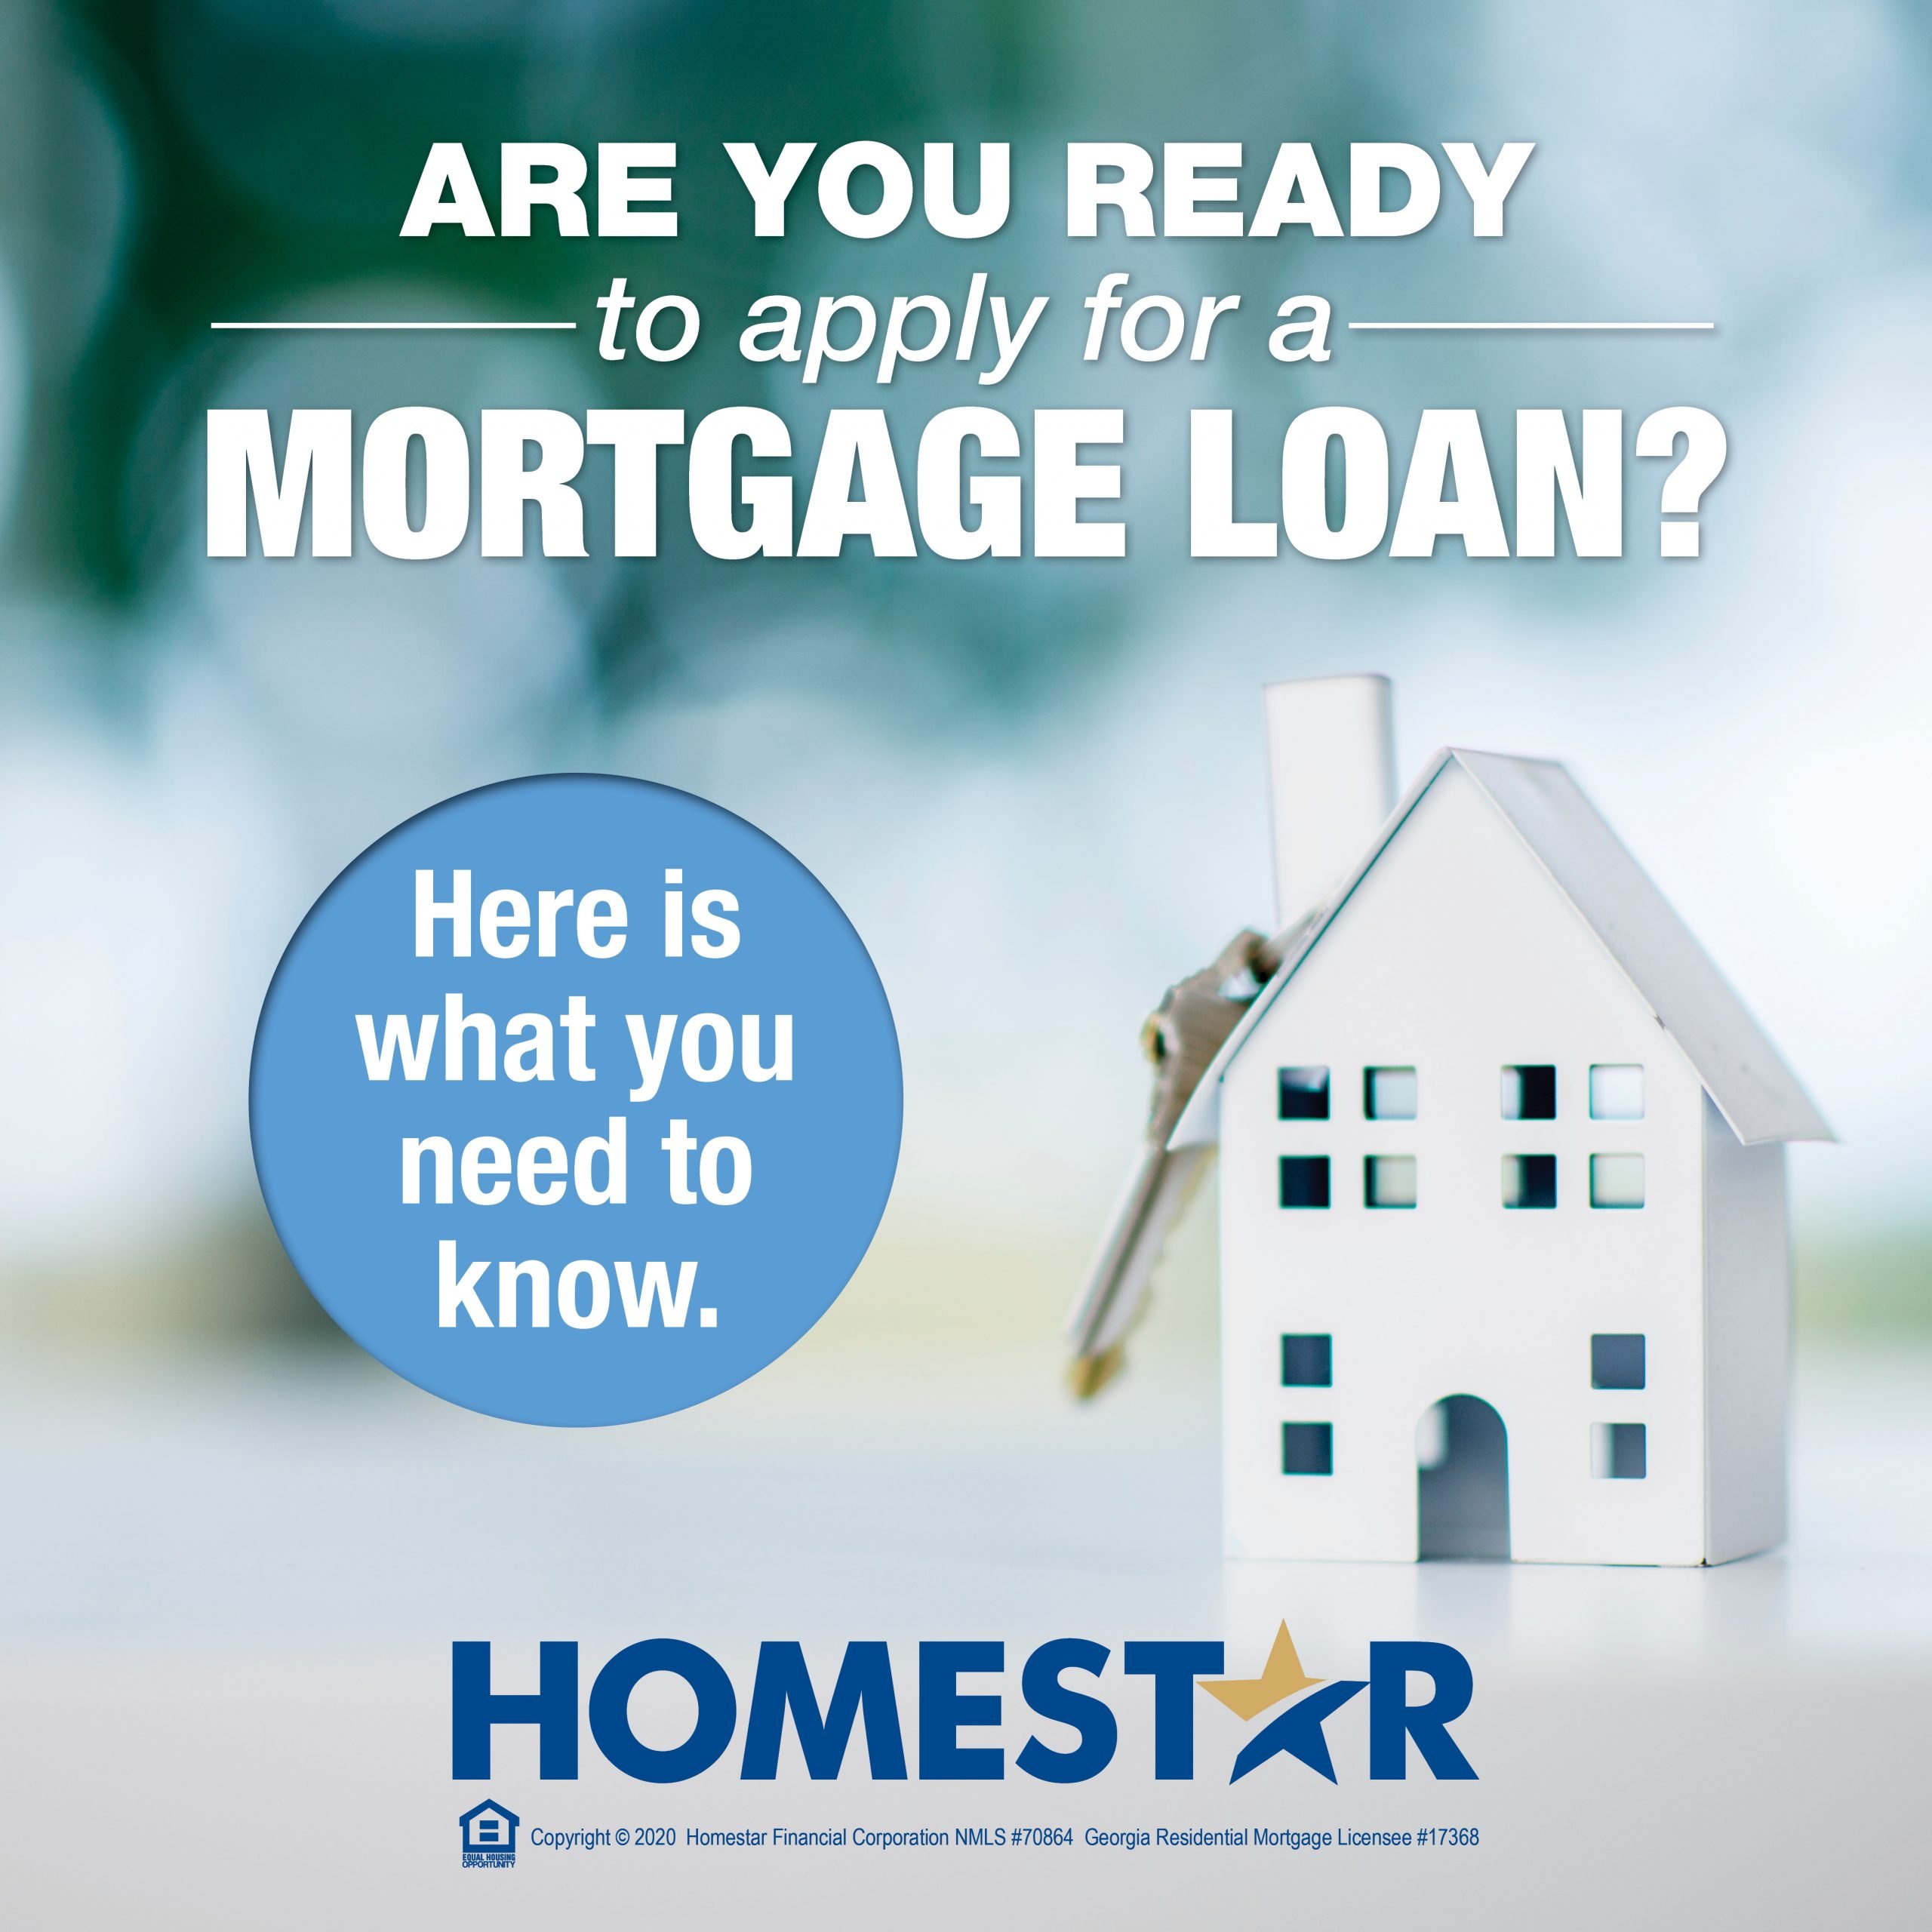 How Do I Qualify for a Mortgage Loan?